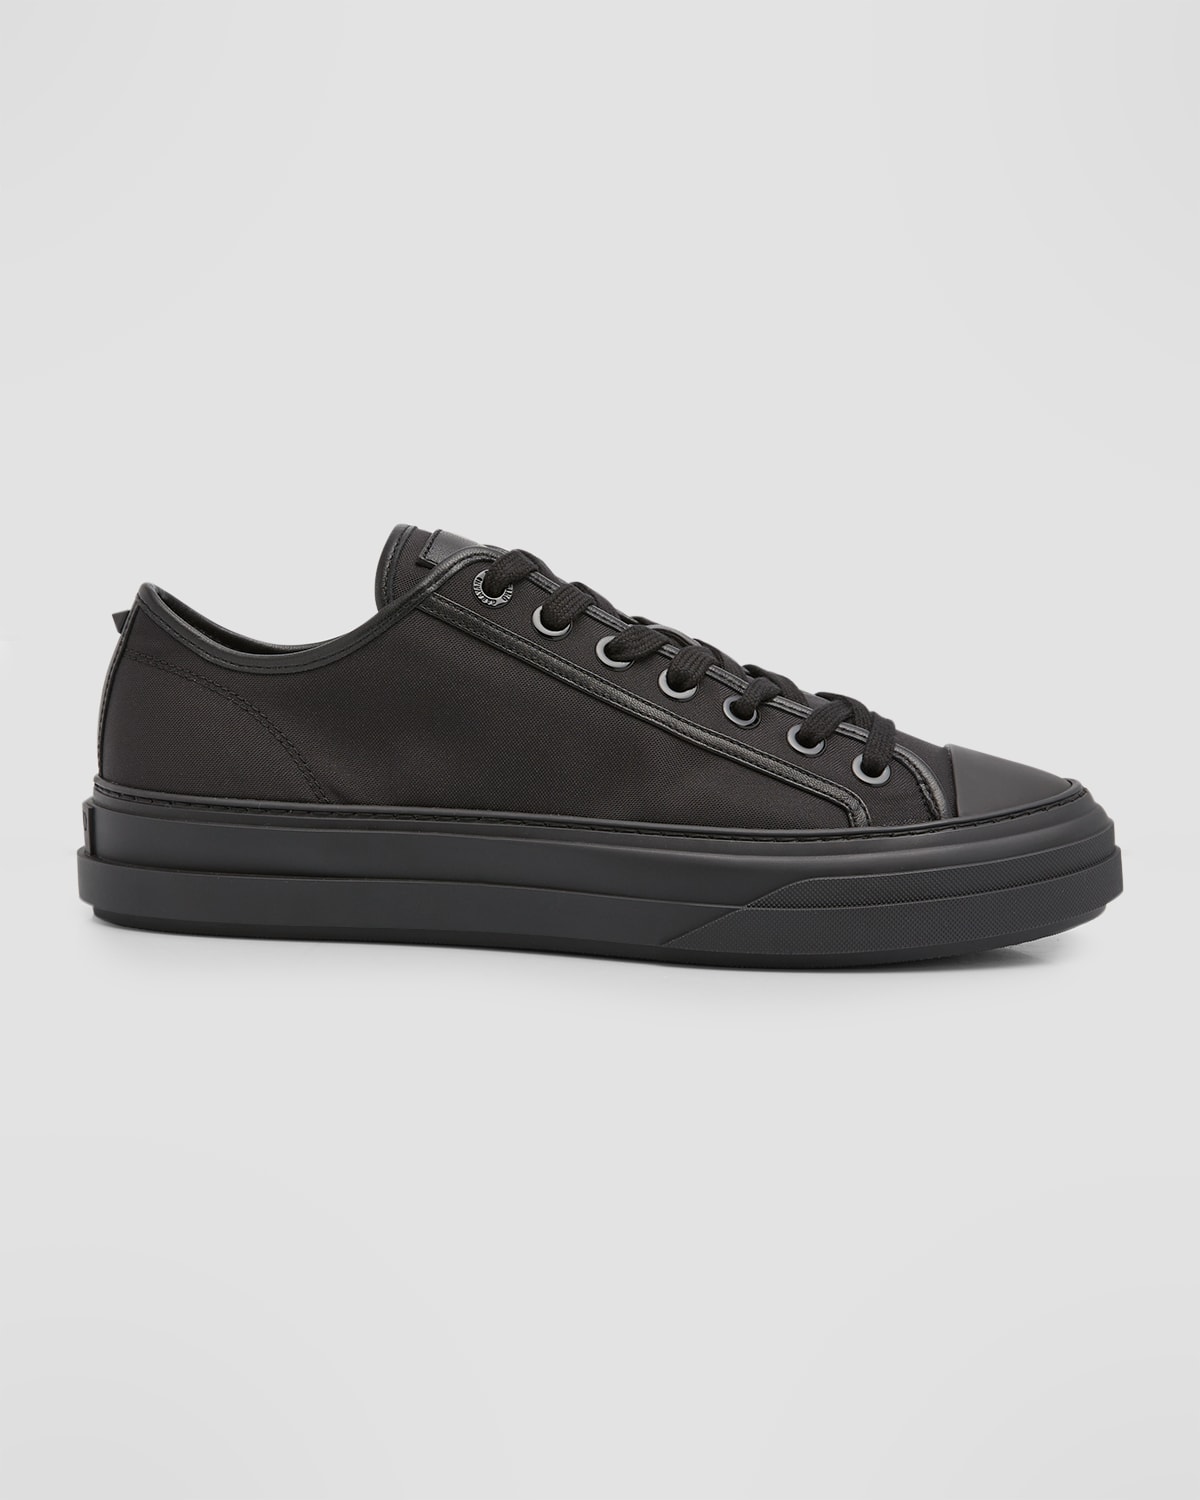 Valentino Men's One Stud XL Low-Top Napa Leather Sneakers | Neiman Marcus